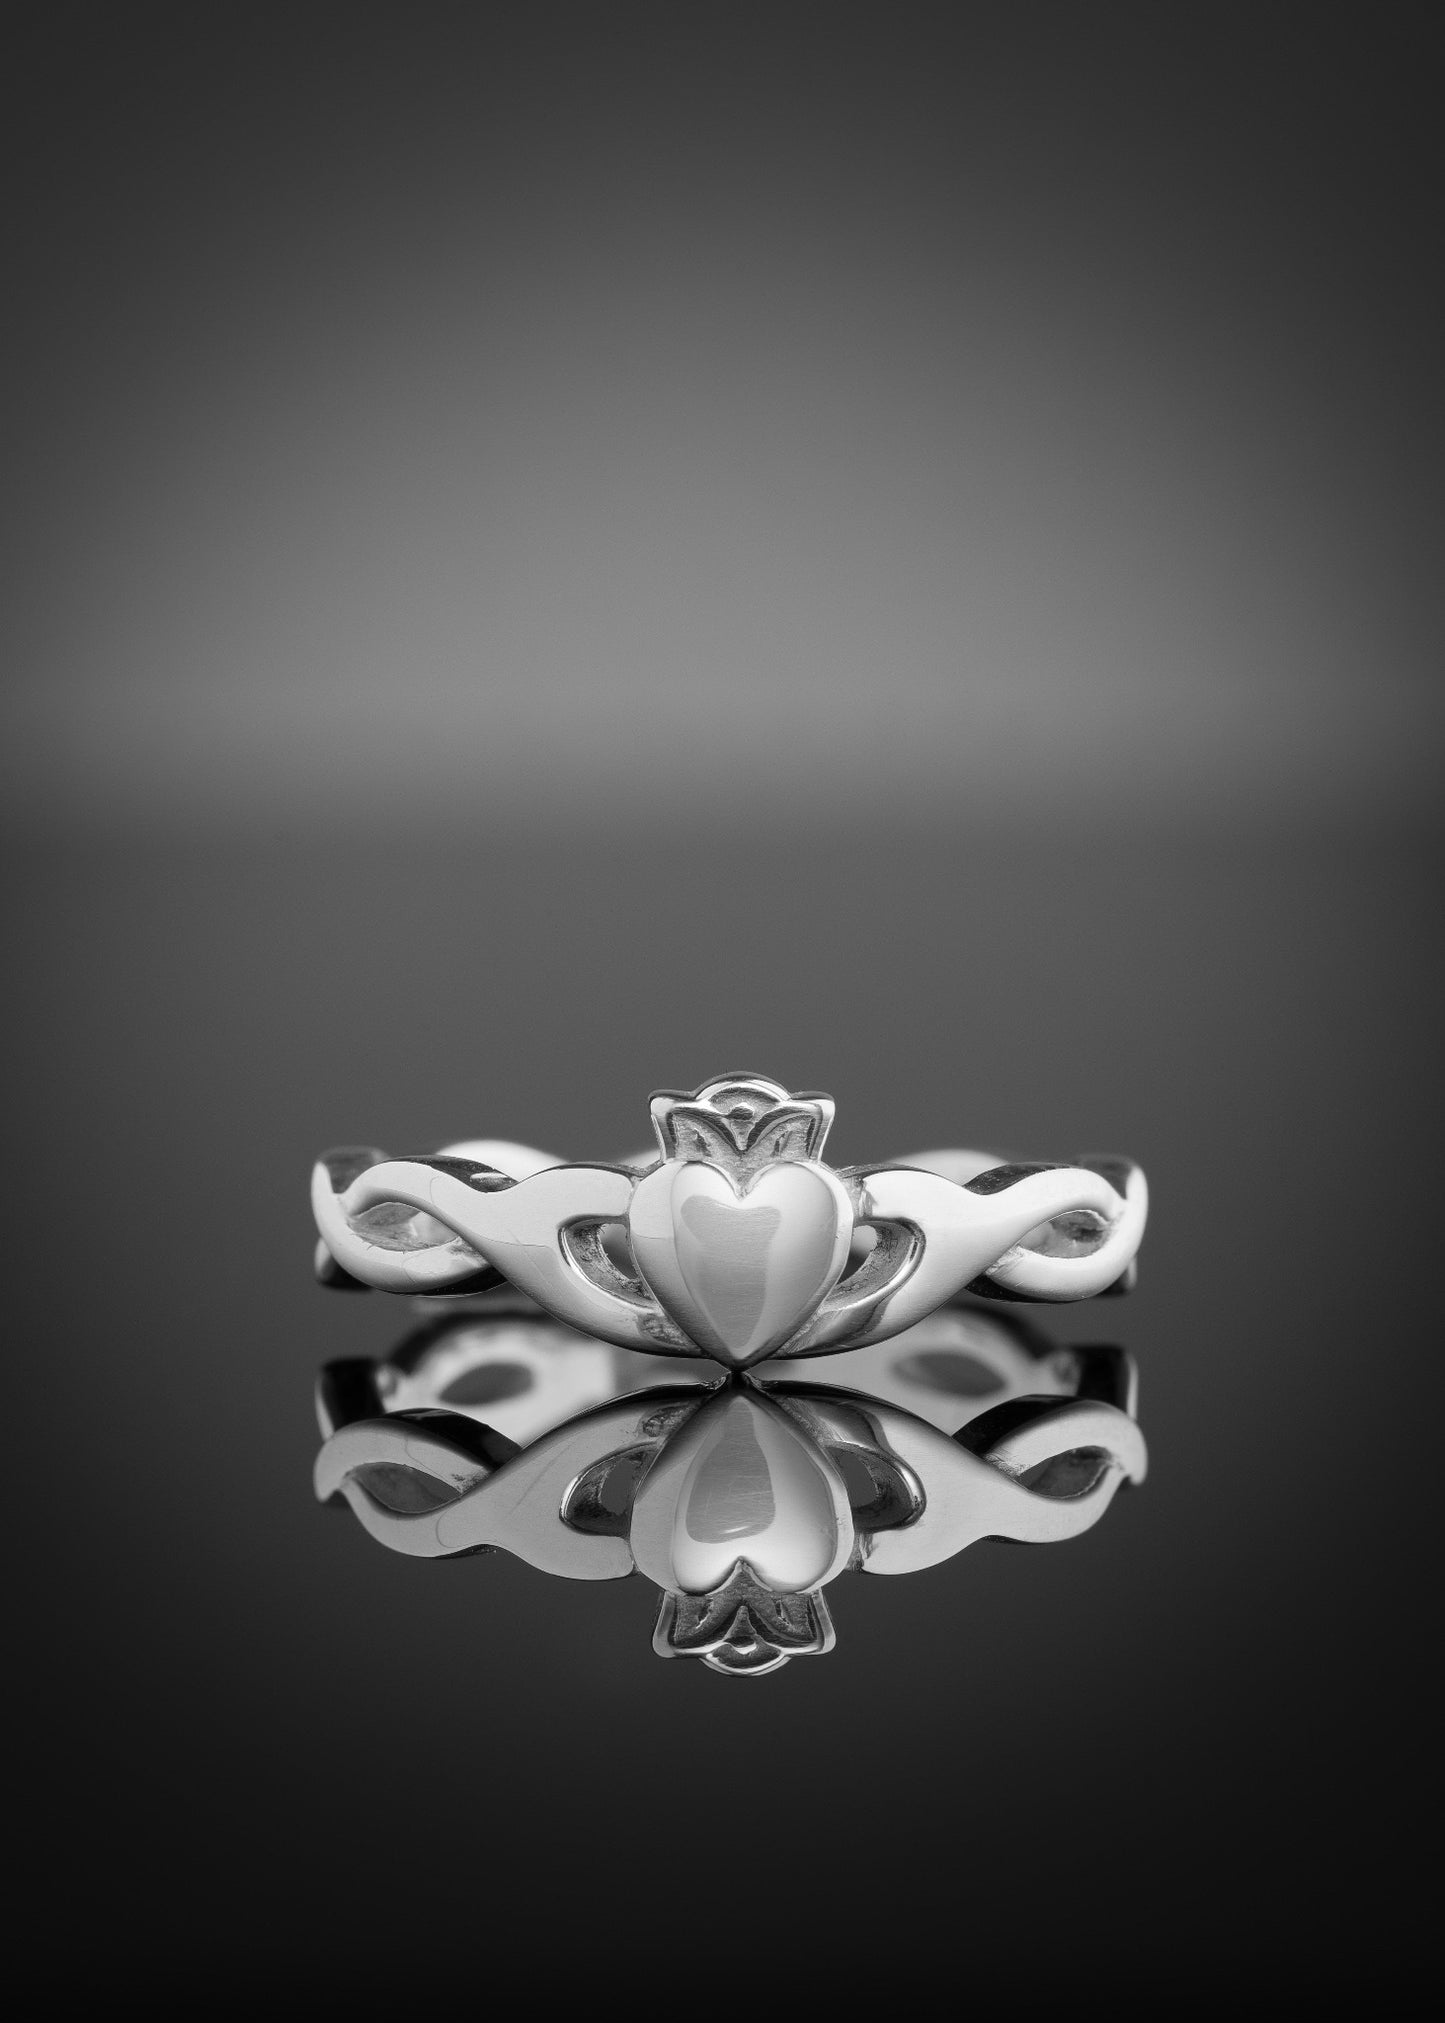 White Gold Claddagh Ring Twist band